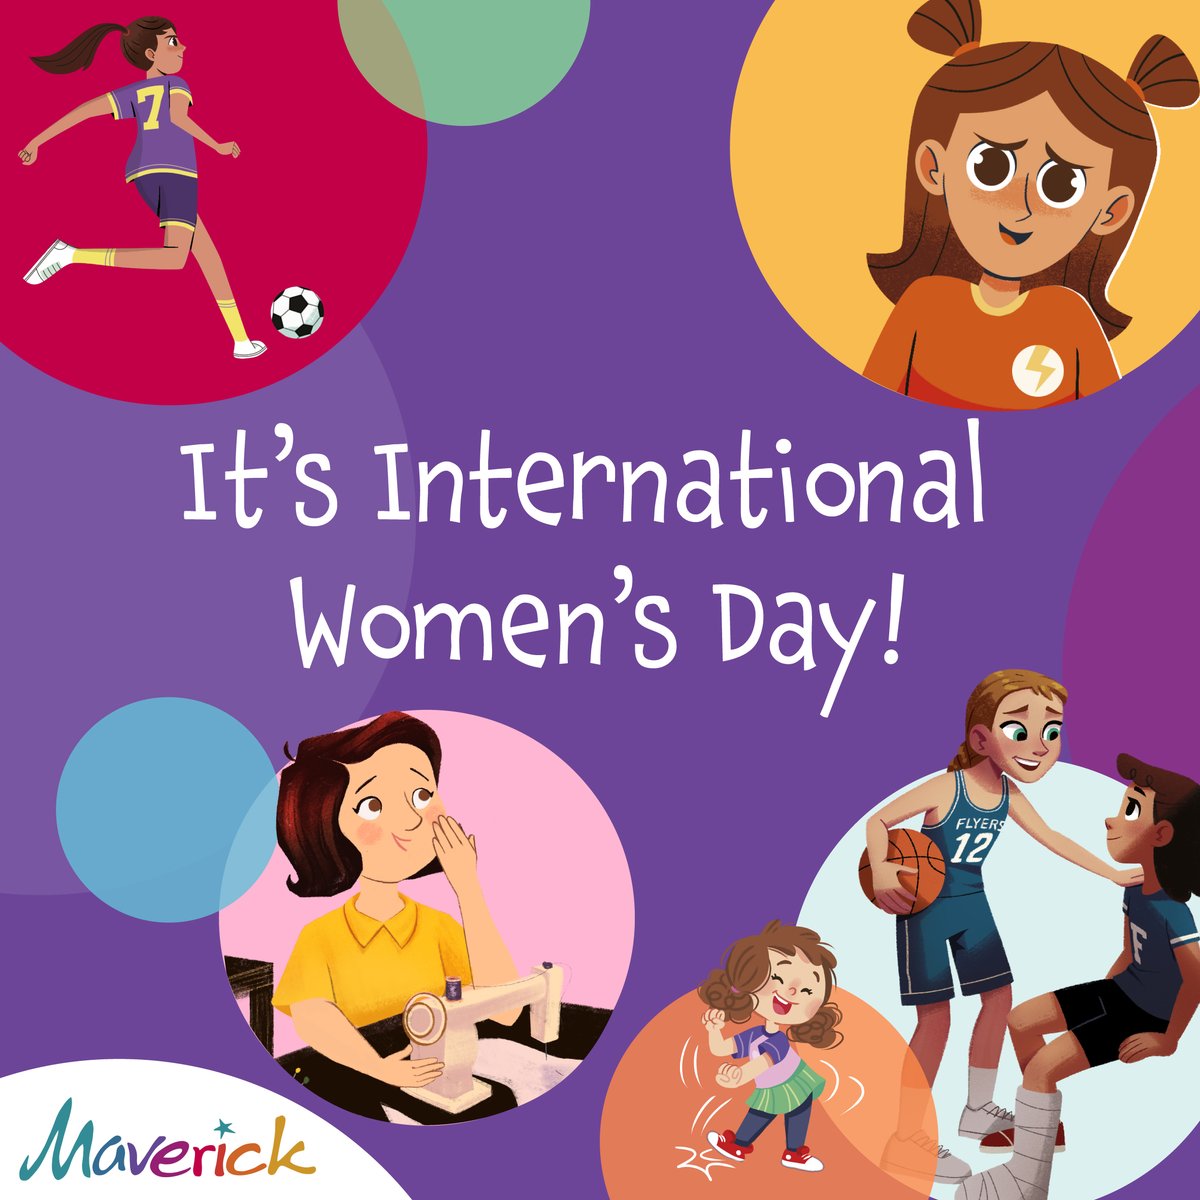 Happy International Women's Day! 👭 We're so proud of our books which celebrate the amazing achievements and abilities of women and girls. We thought it was a perfect time to show off our wonderful female characters! #internationalwomensday #maverickbooks #bookpublisher